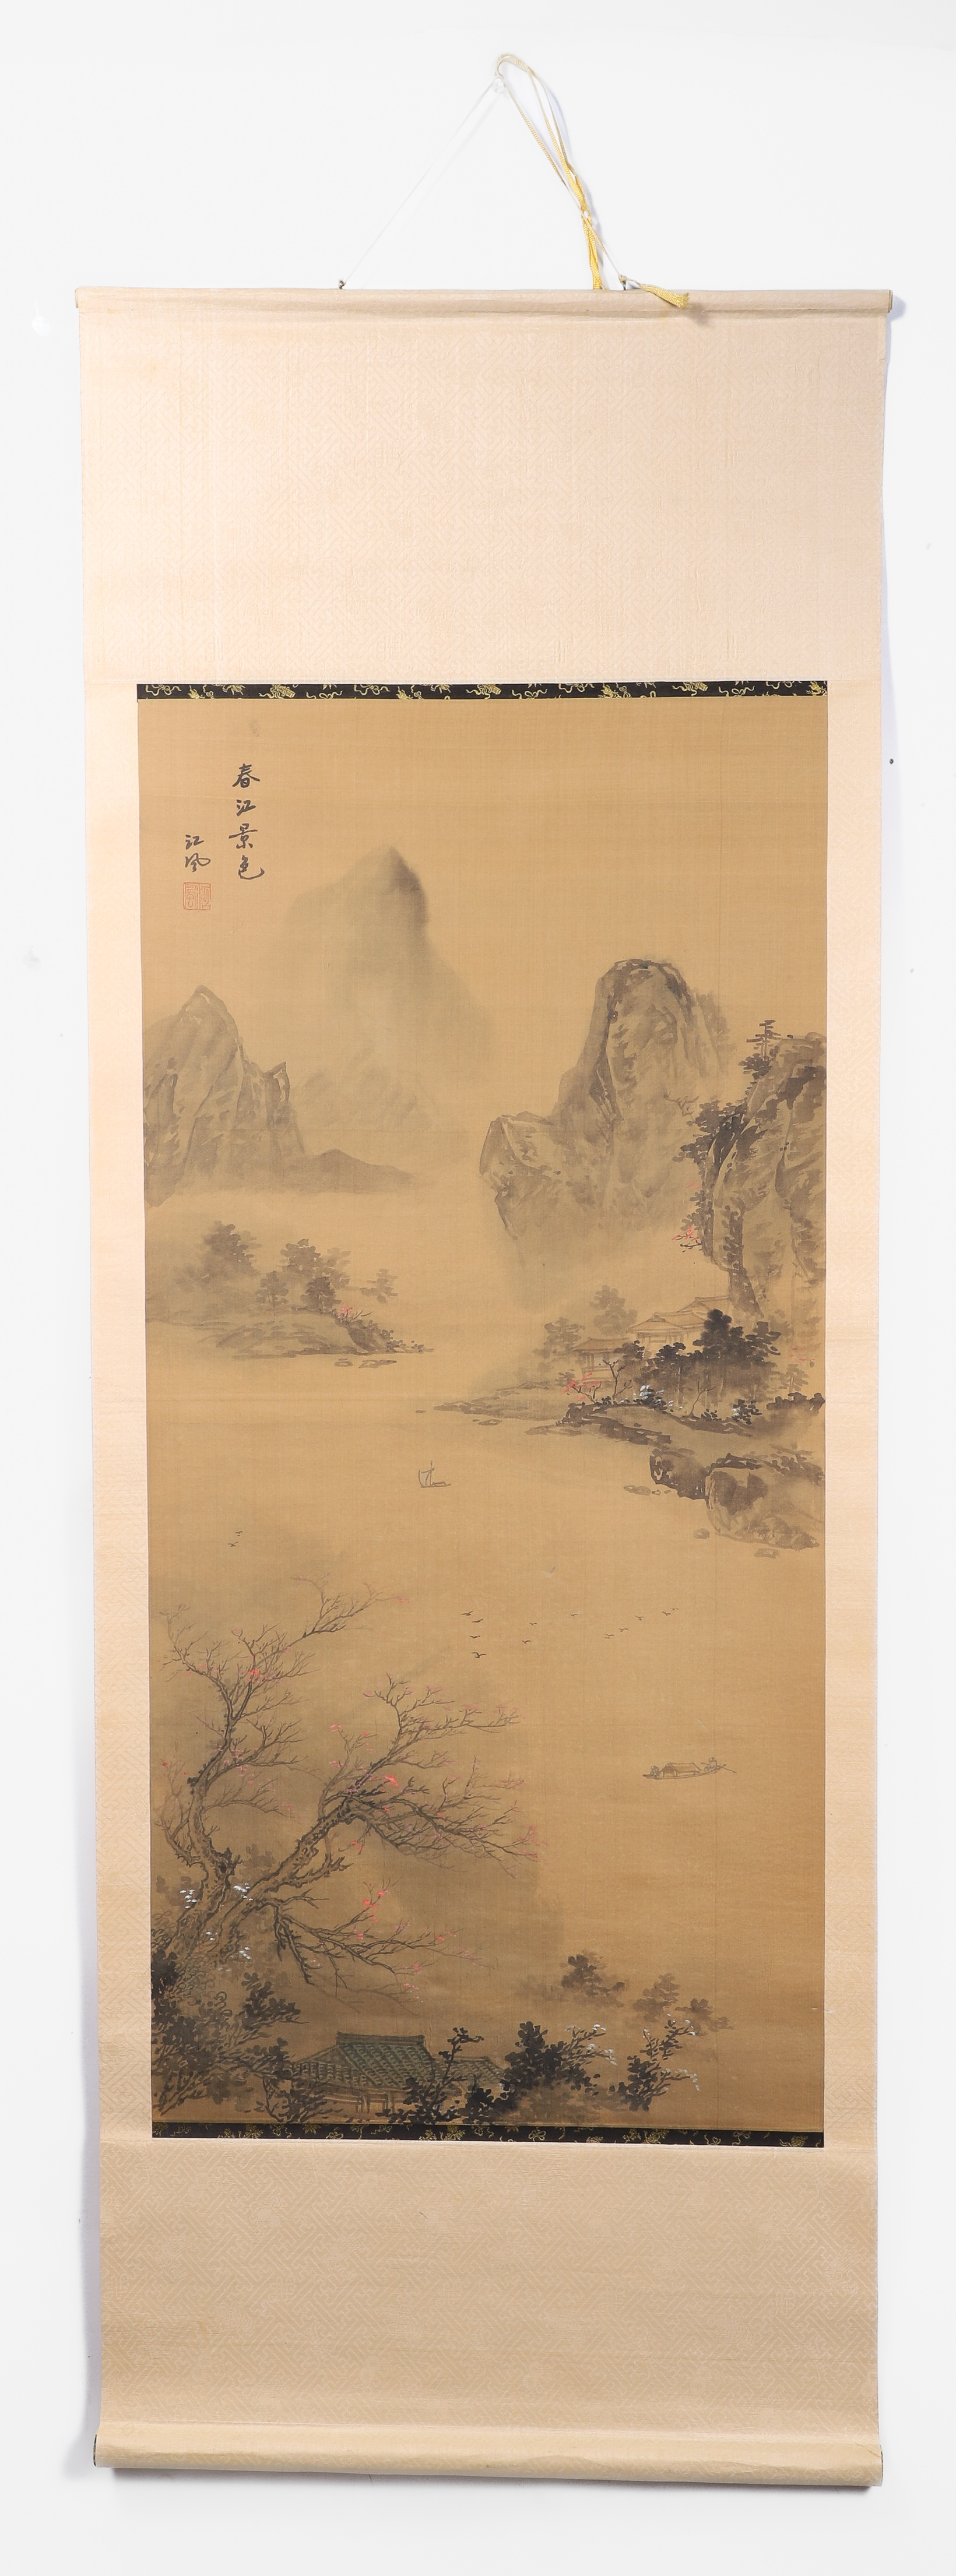 Chinese scroll, house in mountain